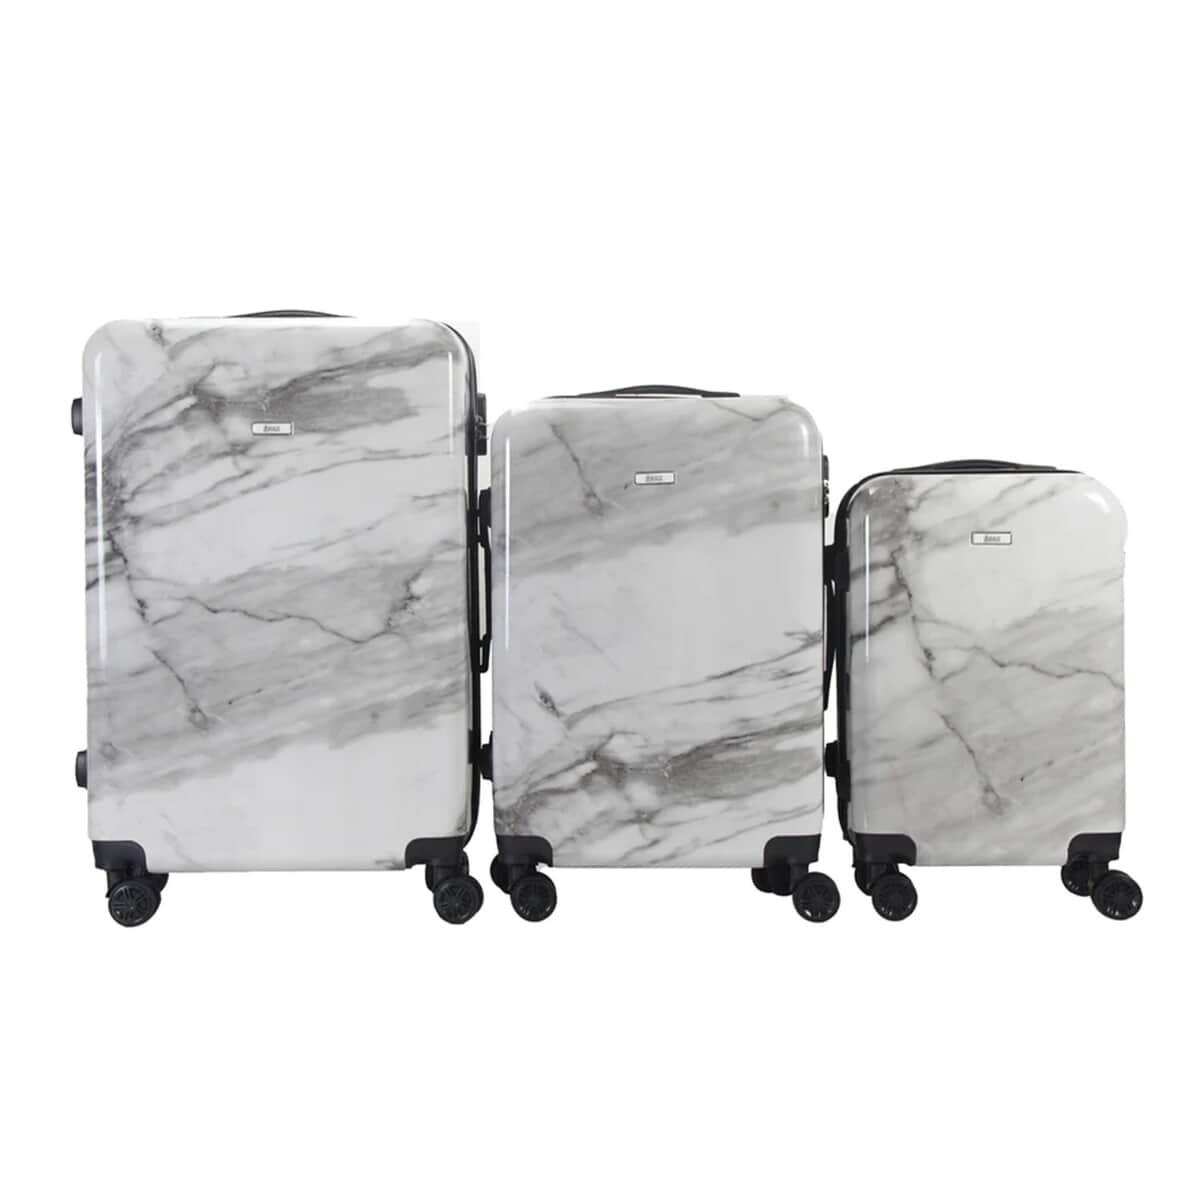 Mirage-Tanya 3 Piece White Marble    Luggage Set with 360 Dual Spinning Wheels and Combo Lock (28" 24", 20") image number 5